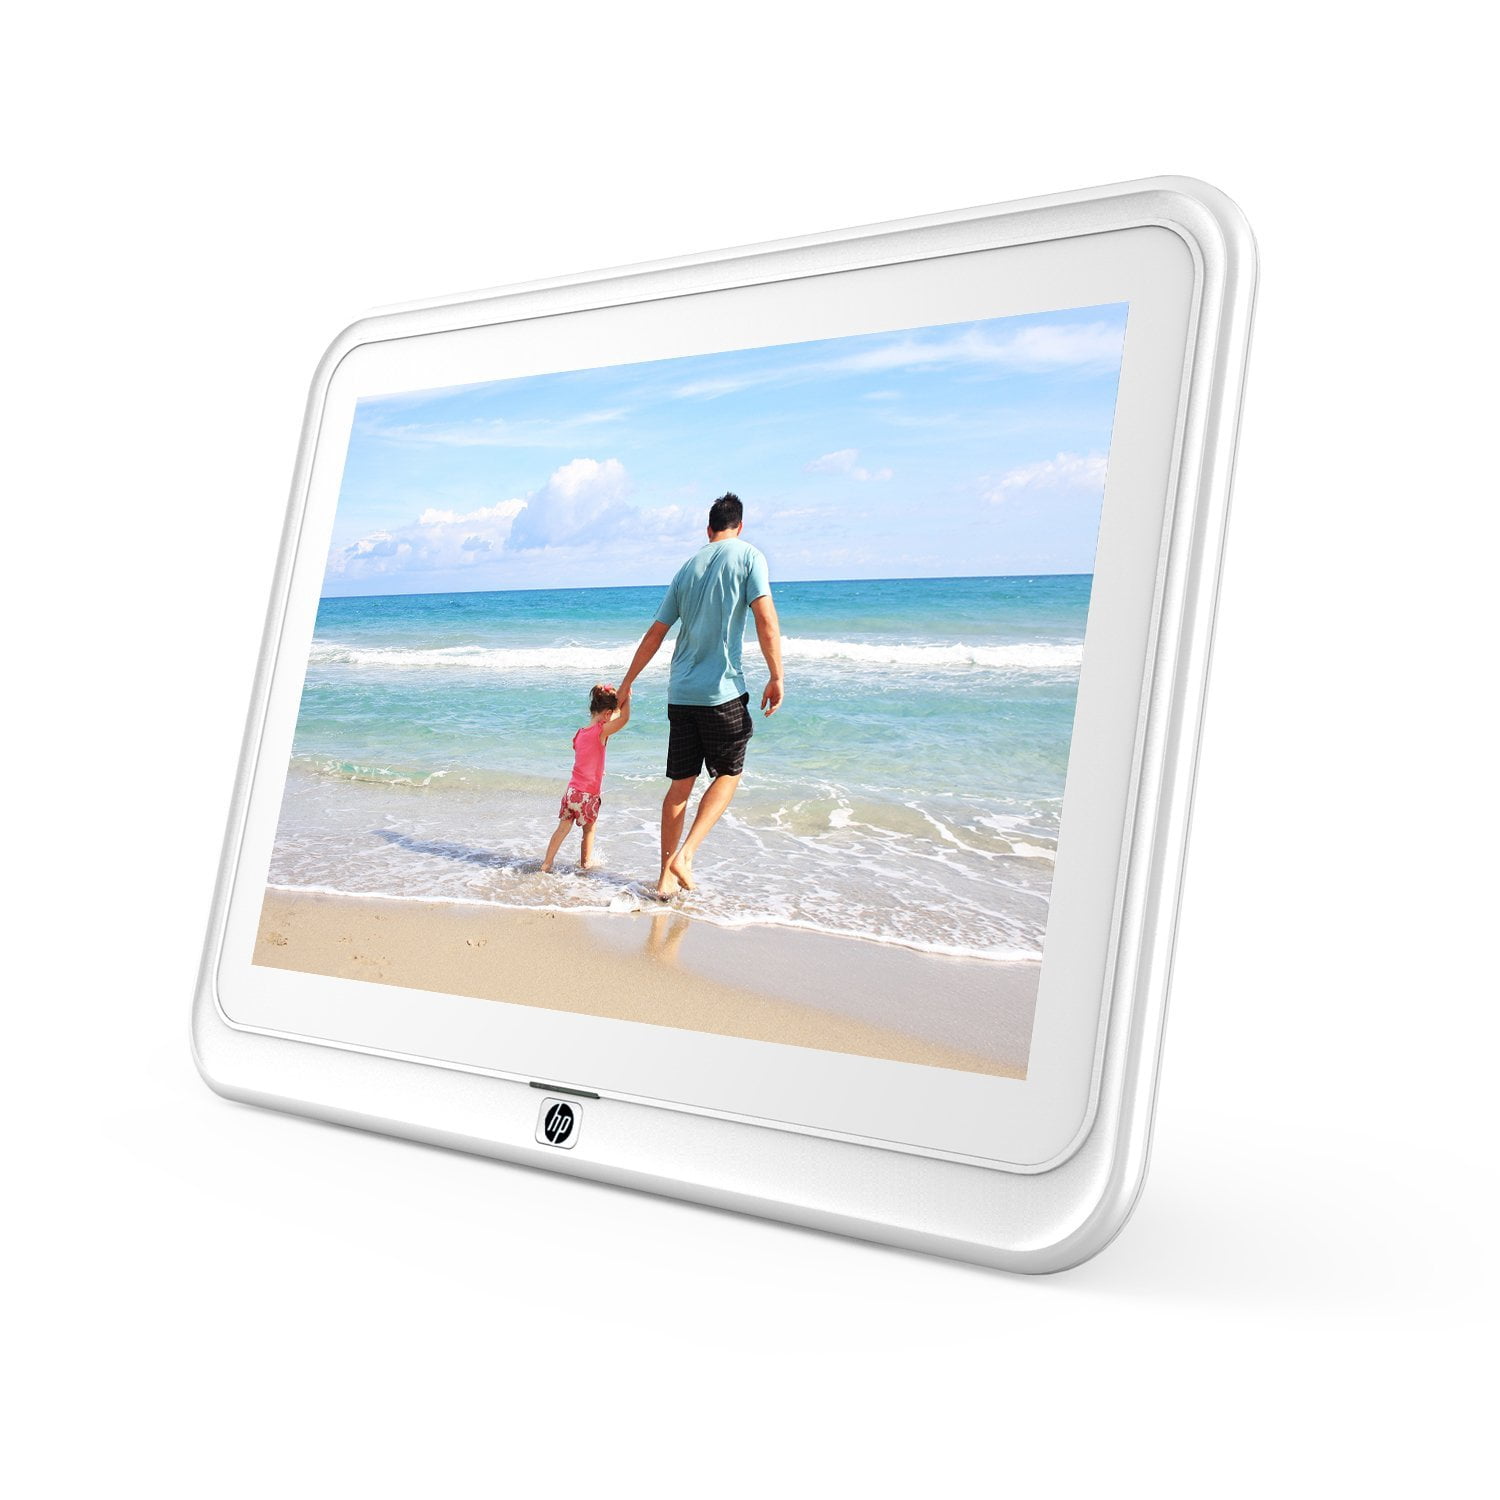 HP df1050tw 10.1 inch WiFi Digital Photo Frame with HD Display, iPhone &  Android App, 8GB Internal Storage, SD Card, Memory Drive Slots, Stereo 